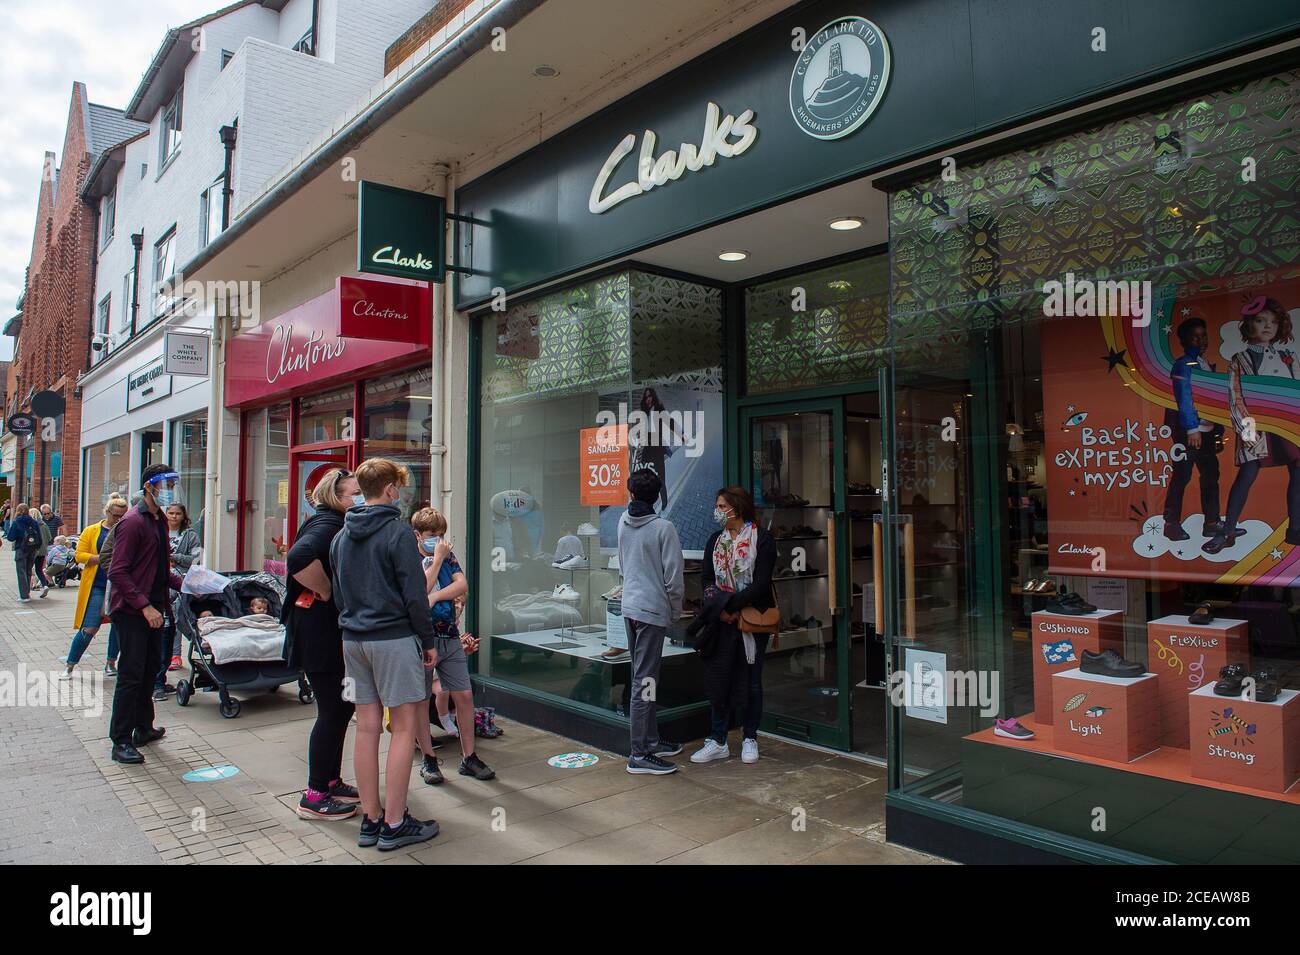 clarks shoes stockport